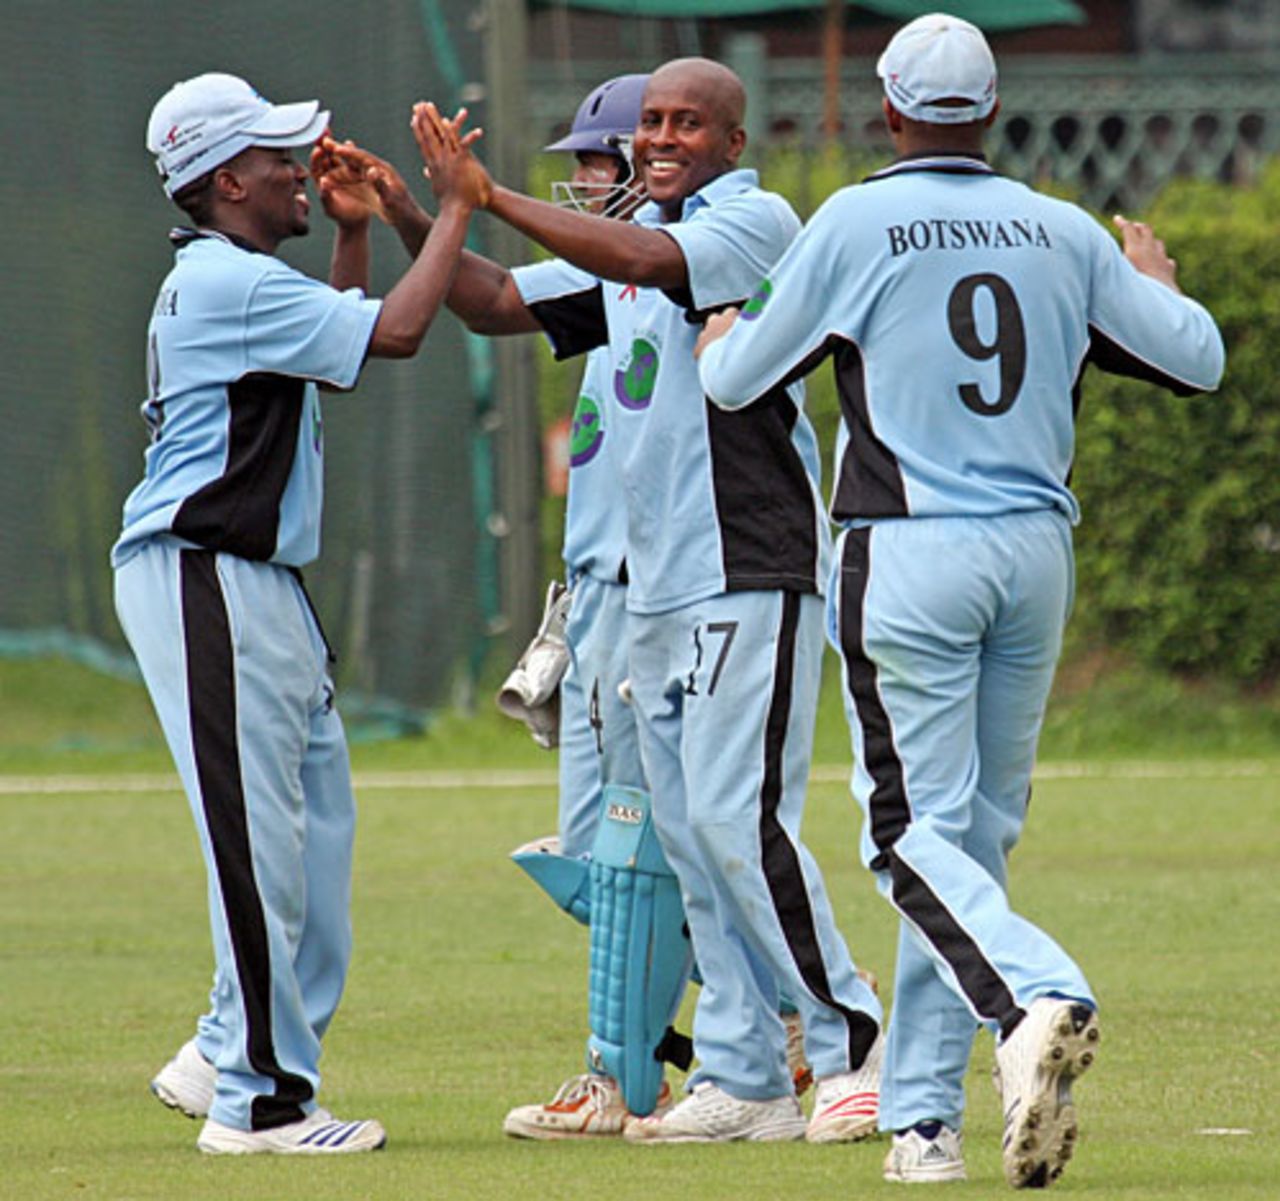 James Moses picked up 2 for 32, Botswana v Guernsey, ICC World Cricket League Division 6, Singapore, September 4, 2009